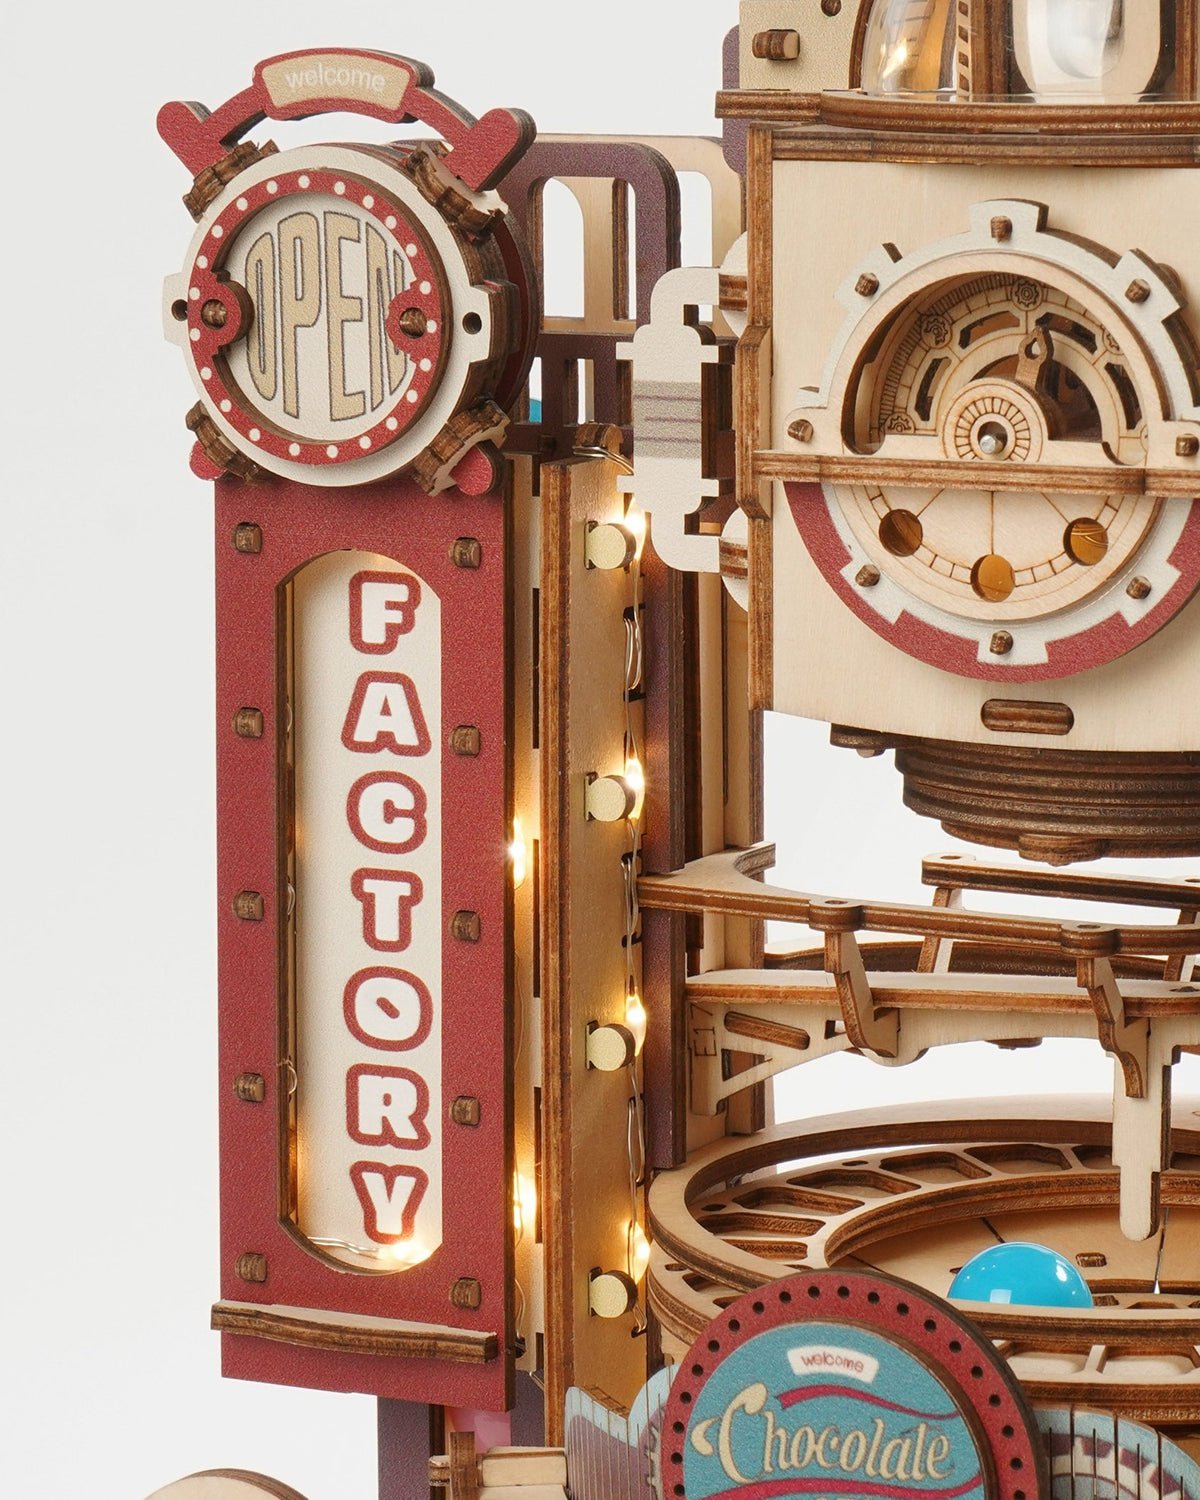 Chocolate Factory 3D Wooden Puzzle